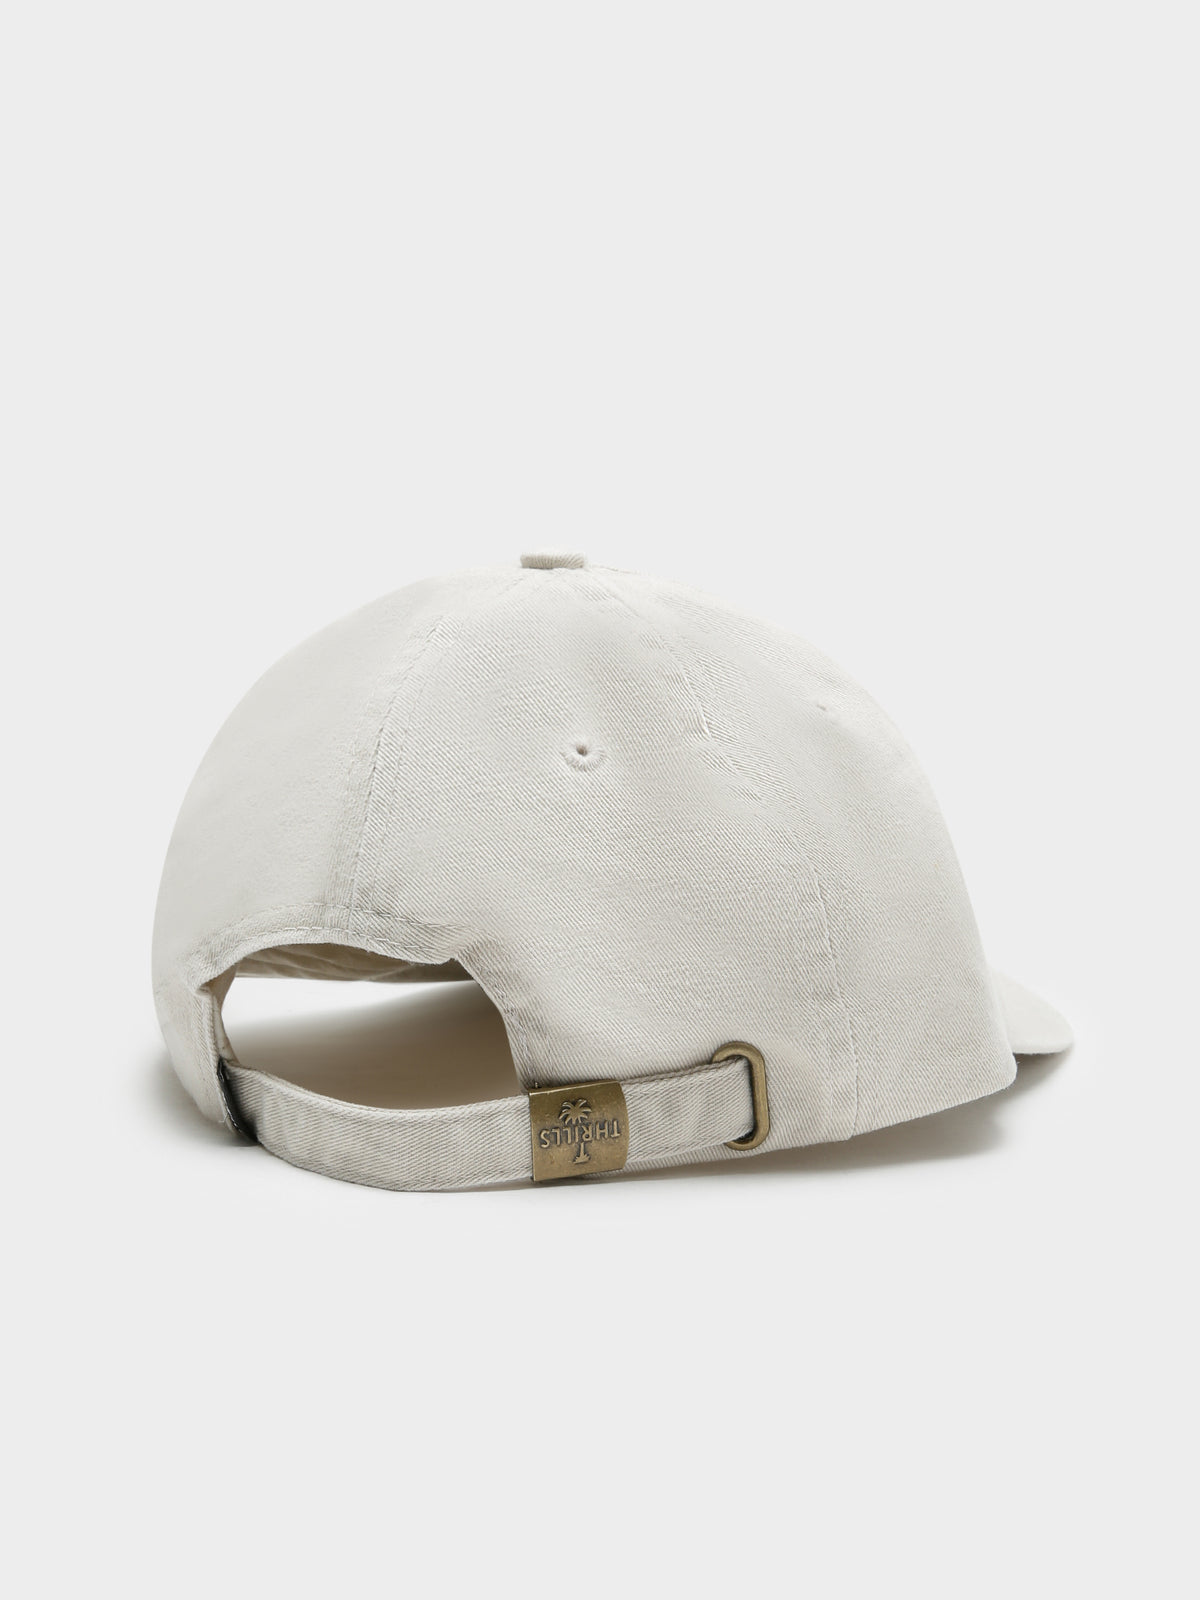 Bad Habits 6 Panel Cap in Dirty White